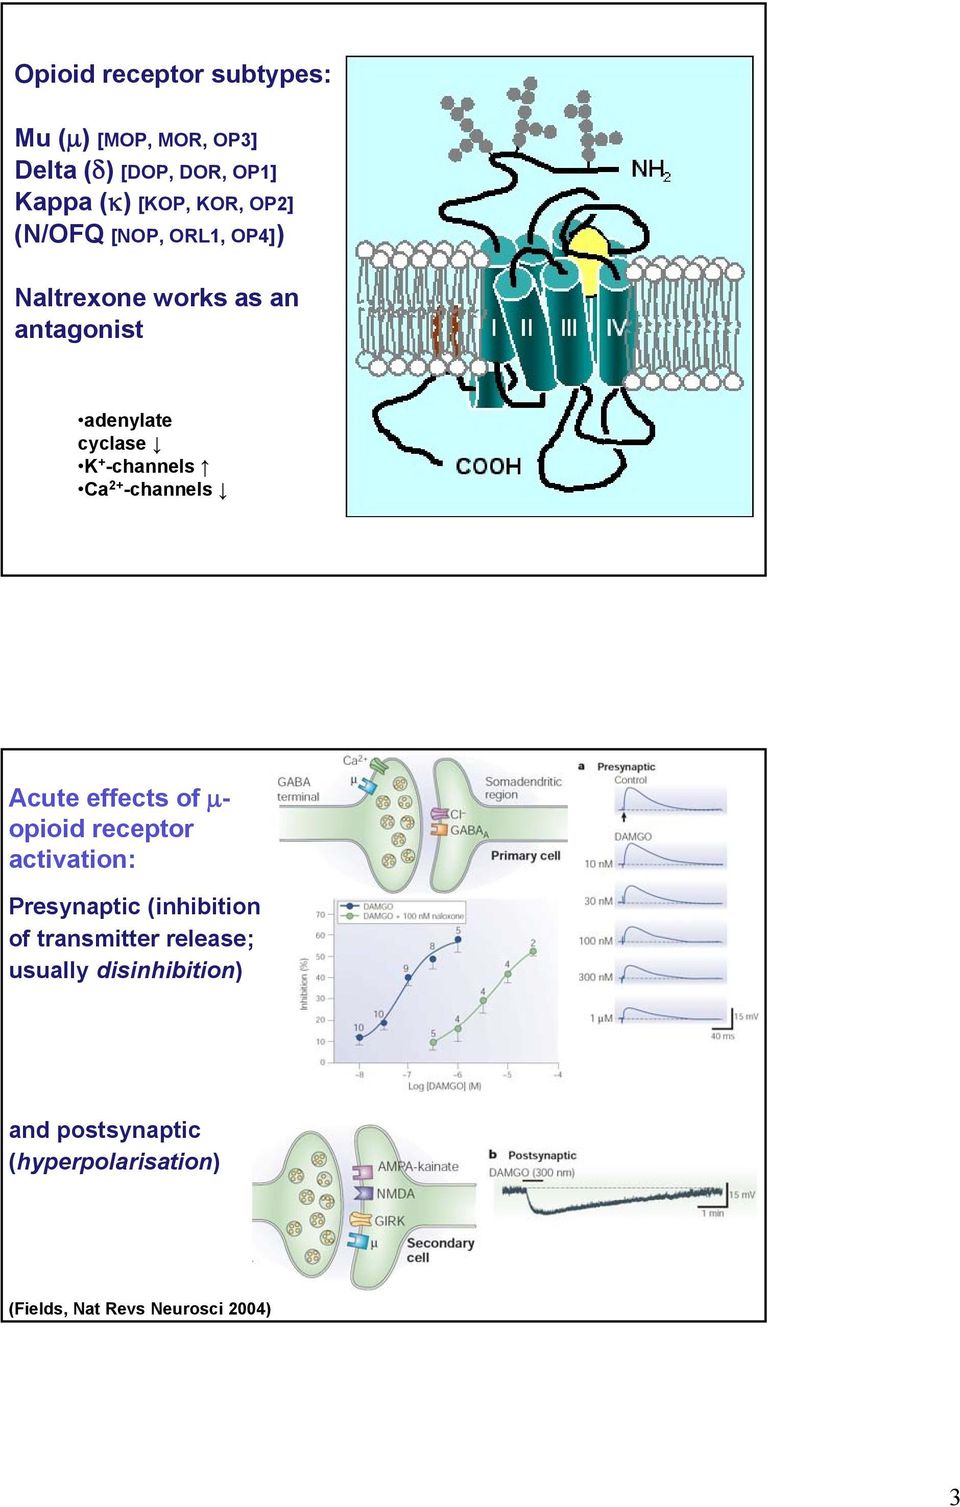 2+ -channels Acute effects of - opioid receptor activation: Presynaptic (inhibition of transmitter